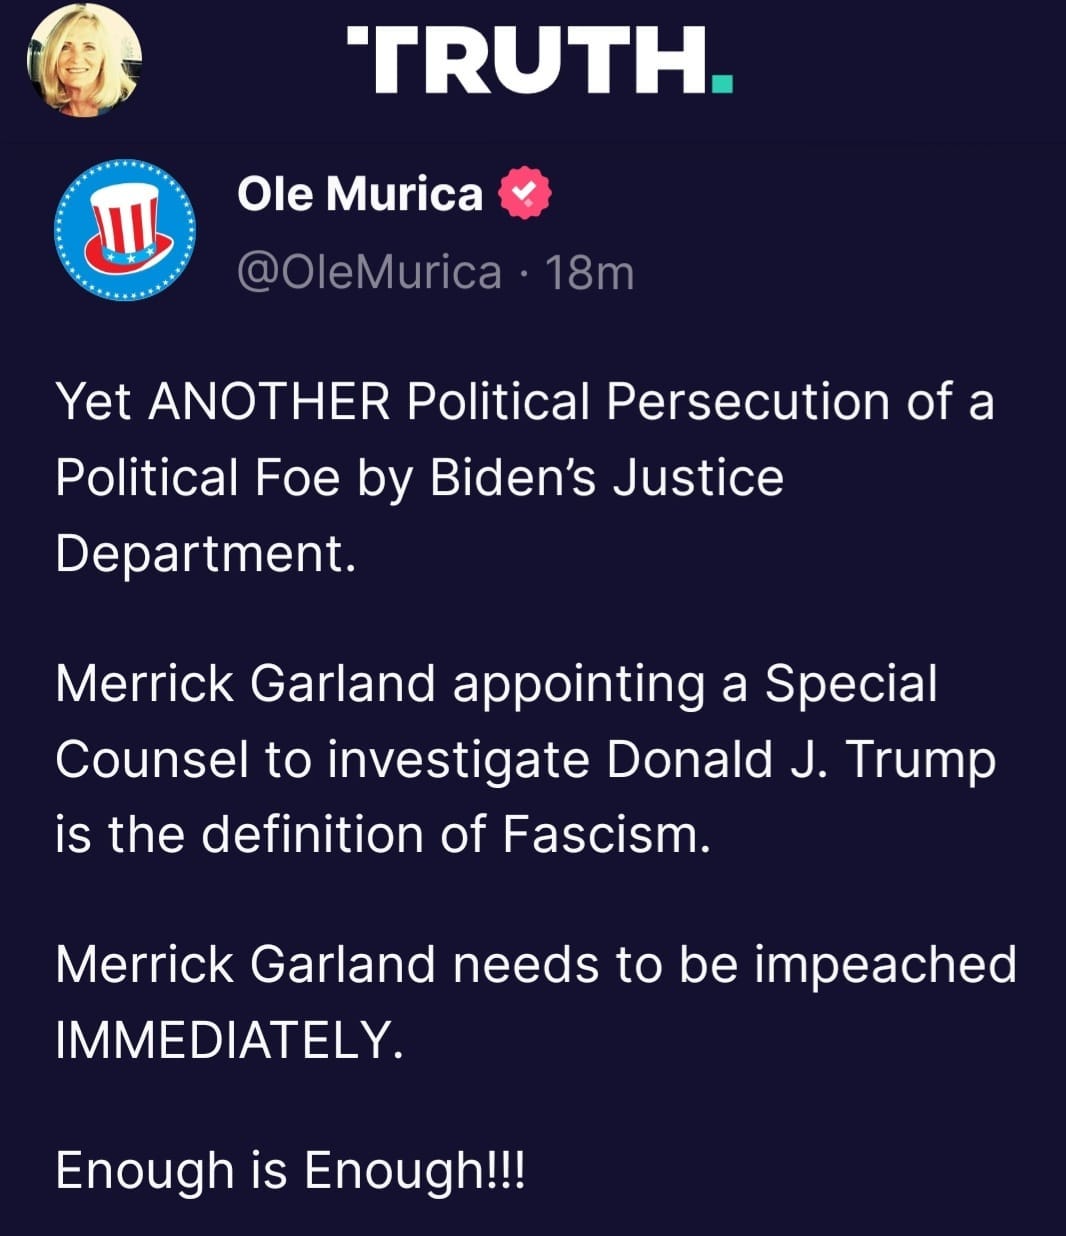 May be a Twitter screenshot of ‎1 person and ‎text that says '‎TRUTH. لا Ole Murica @OleMurica 18m Yet ANOTHER Political Persecution of a Political Foe by Biden's Justice Department. Merrick Garland appointing a Sp”cial Counsel to investigate Donald J. Trump is the definition of Fascism. Merrick Garland needs to be impeached IMMEDIATELY. Enough is Enough!!!‎'‎‎